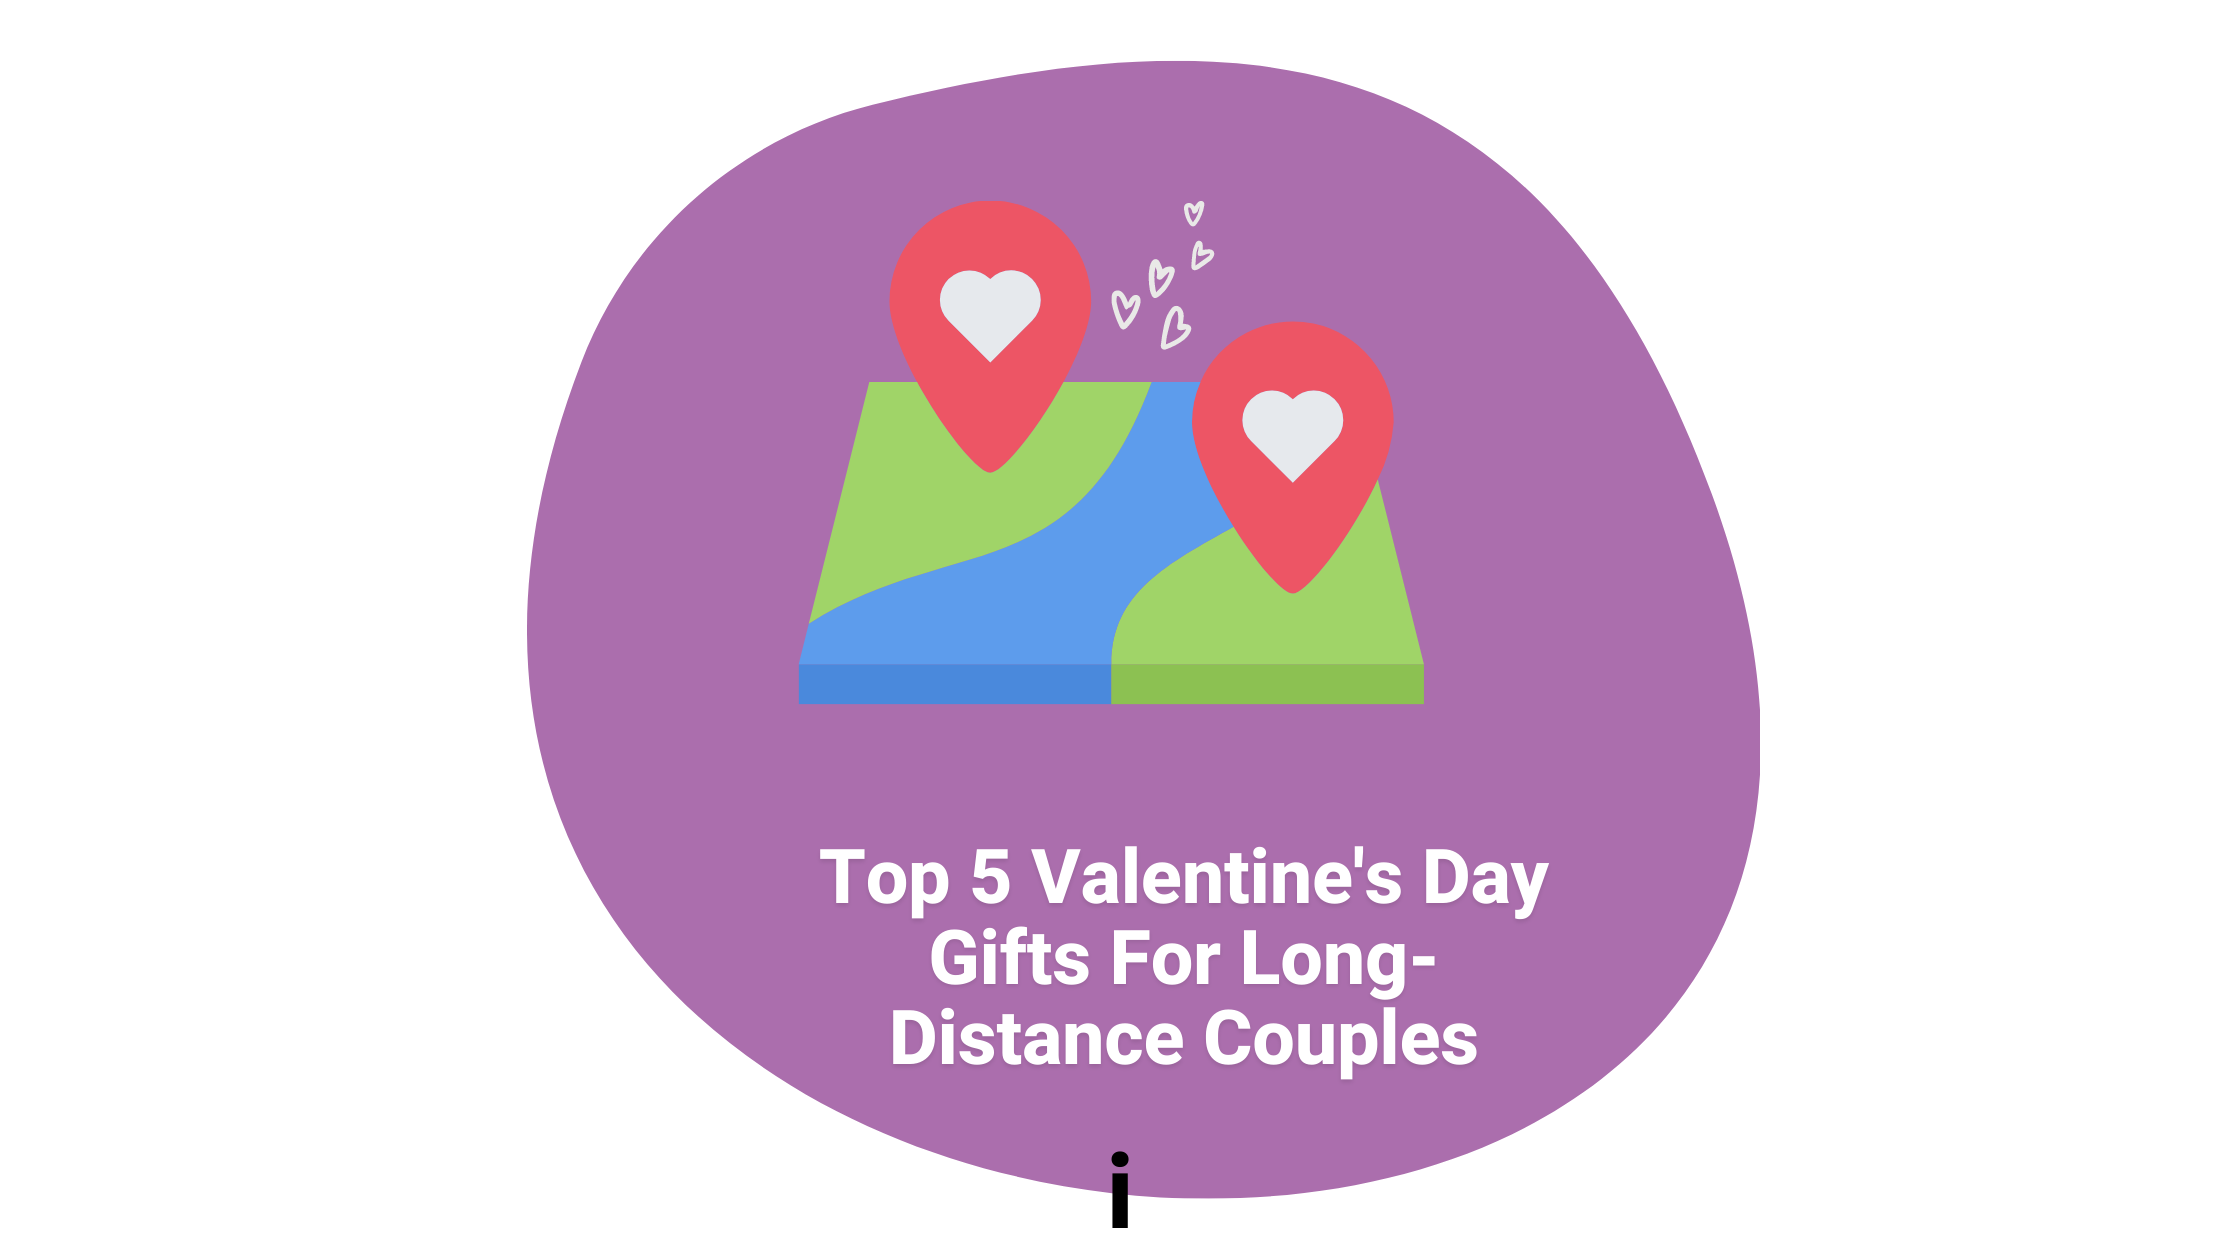 Top 5 Valentine's Day Gifts For Long-Distance Couples